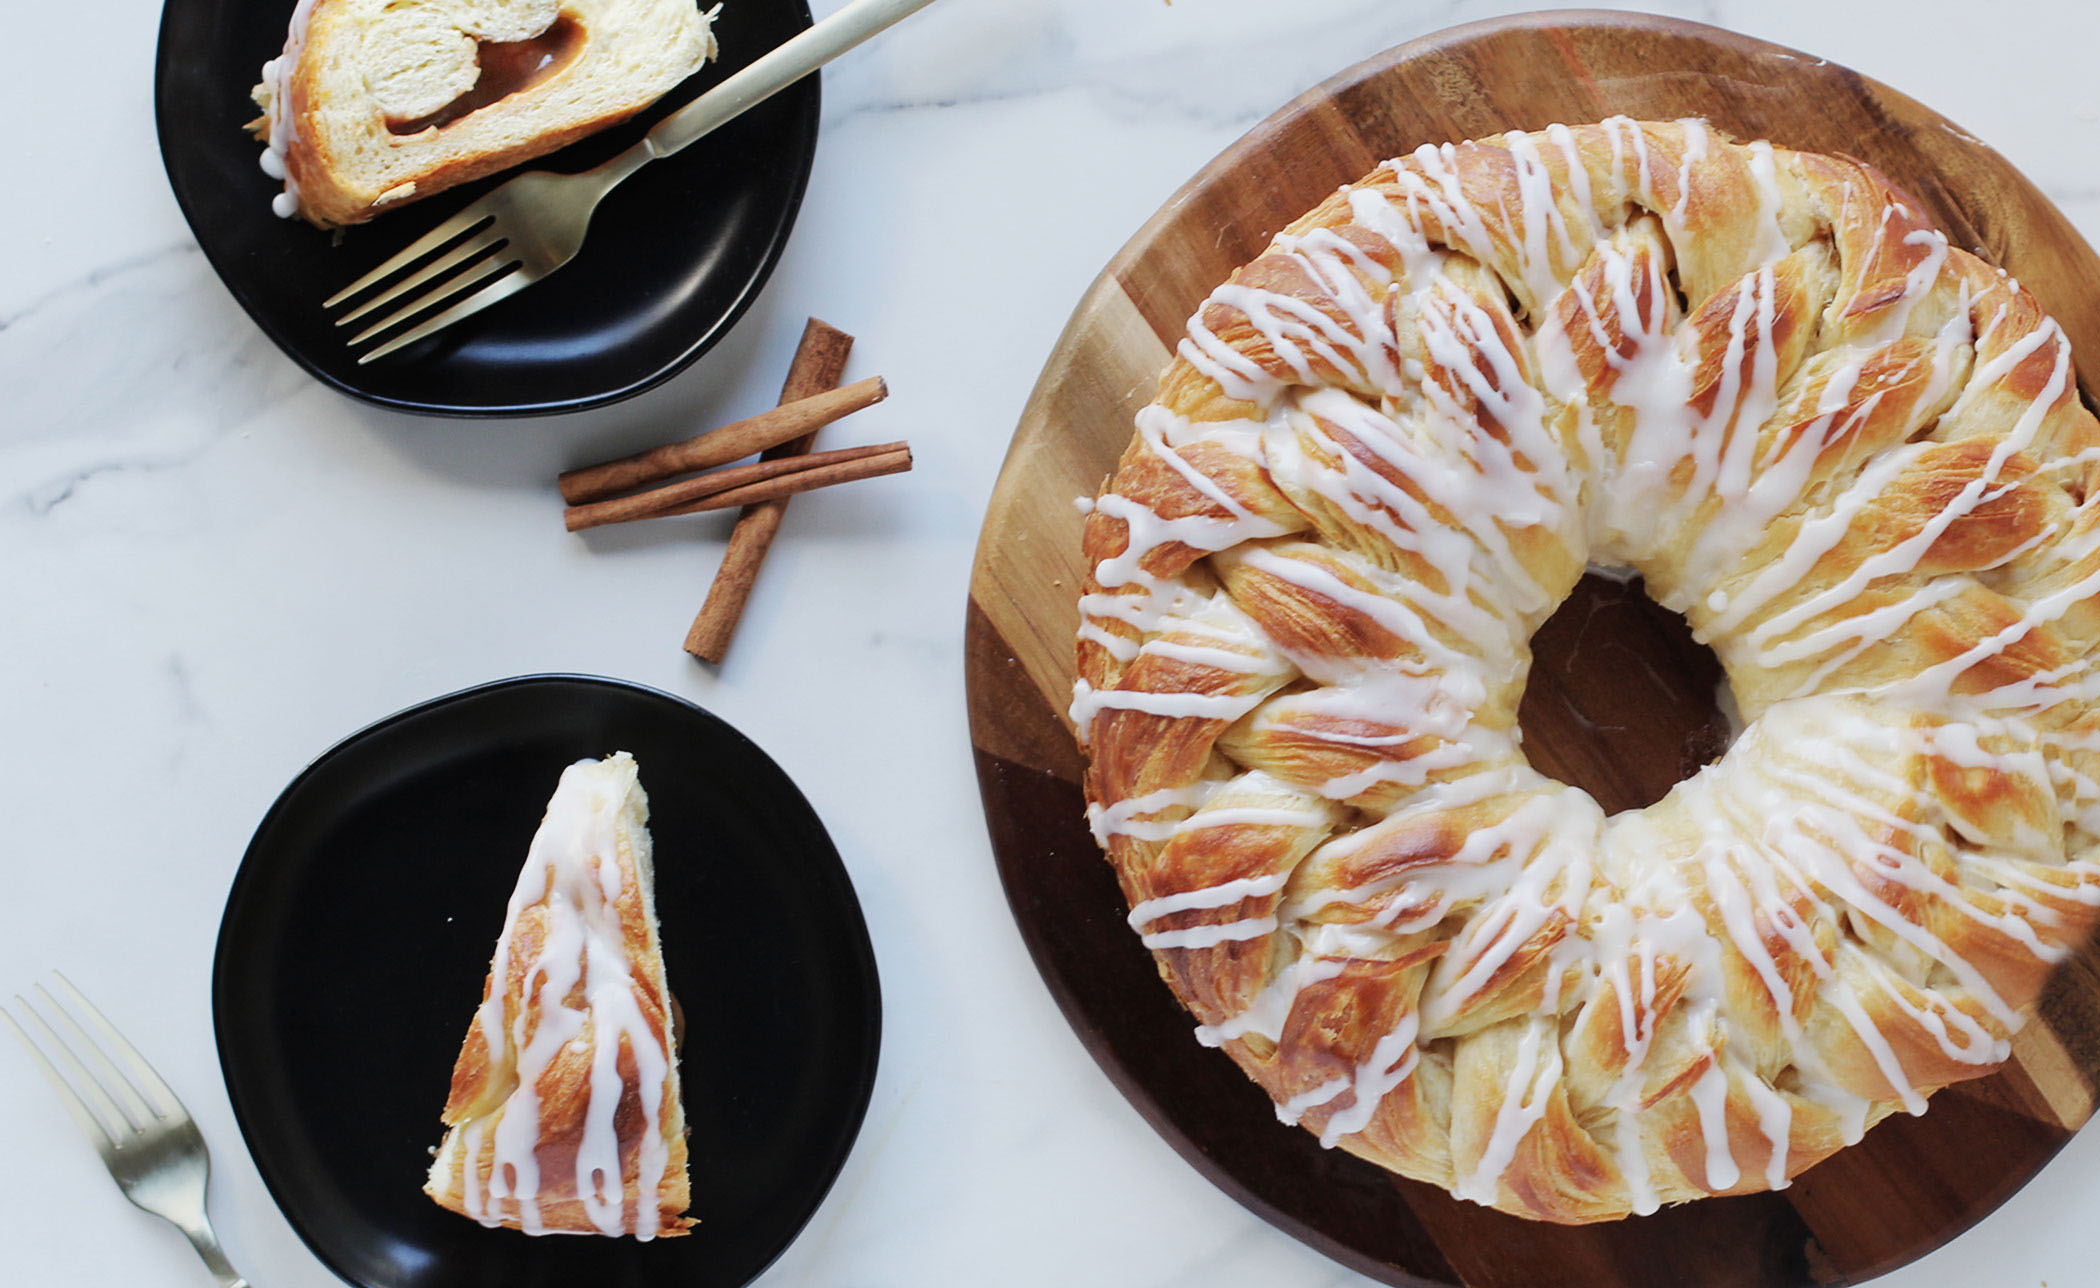 Cinnamon Braided Pastry Ring with two slices of pastries on plates. Cinnamon sticks as garnish.